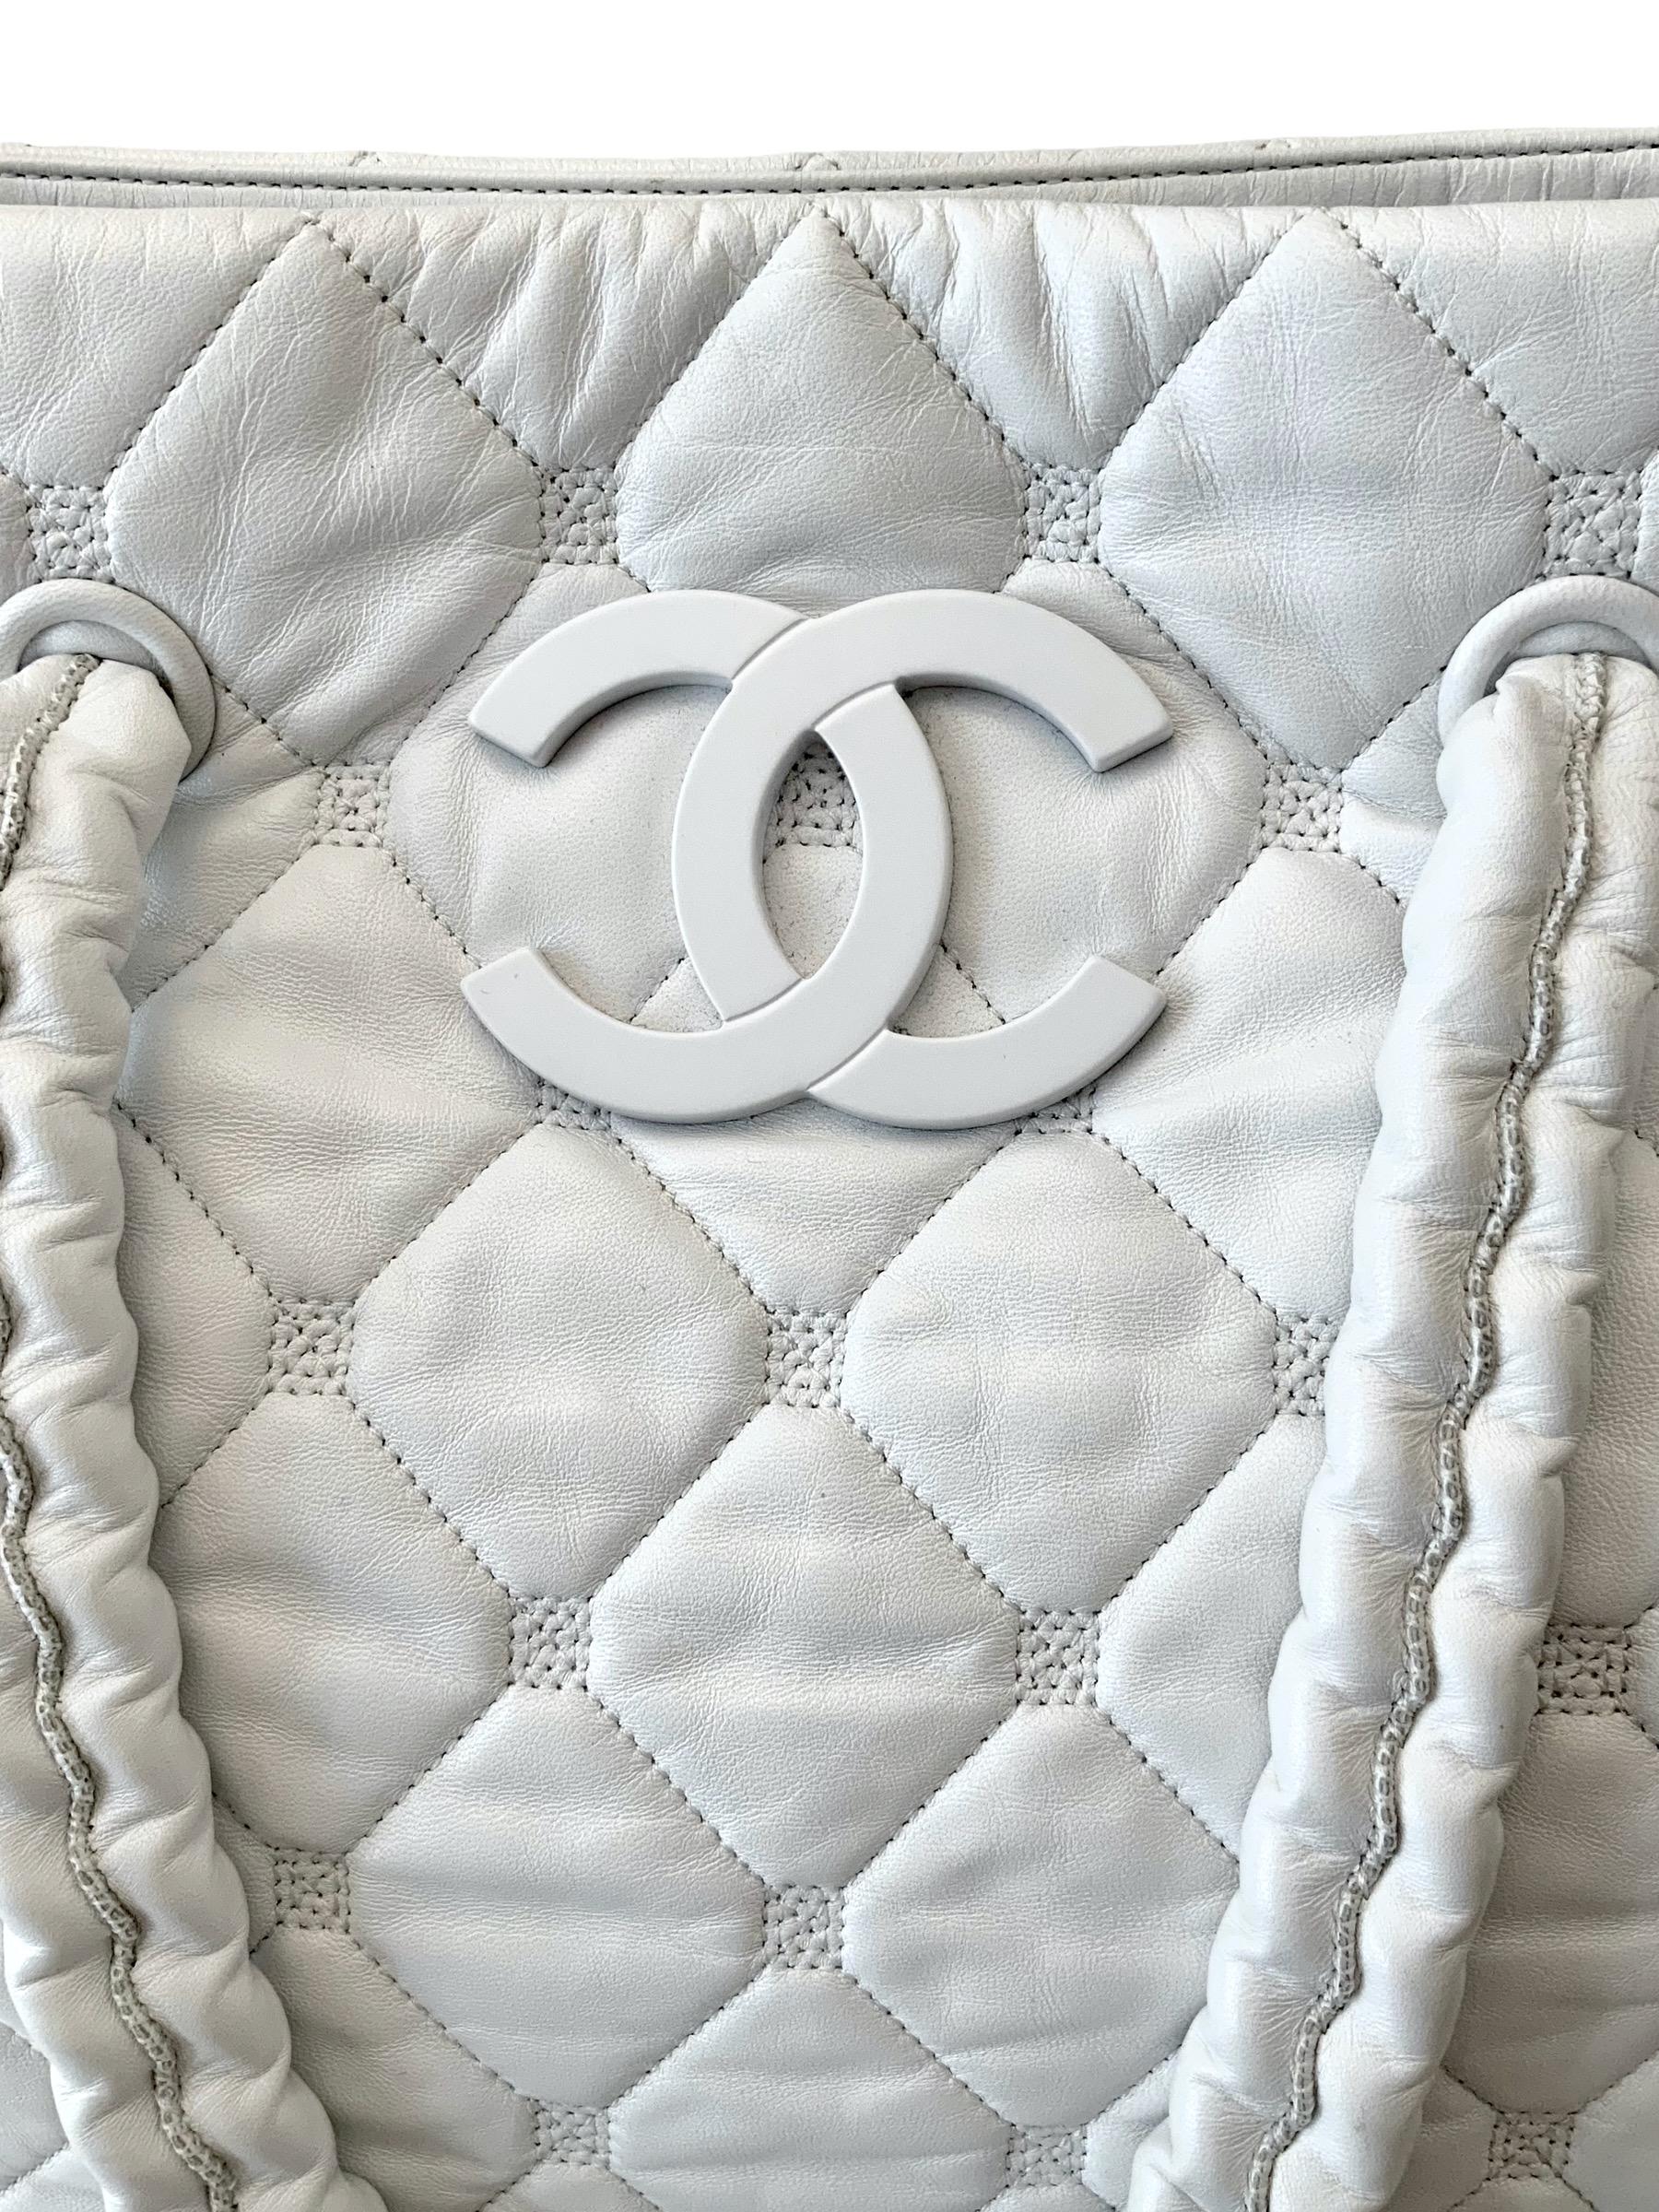 This pre-owned white lambskin leather tote bag from the Chanel 2008 Collection is a hard piece to find especially in such good condition. 
It features a diamond quilted lambskin leather with leather covered 